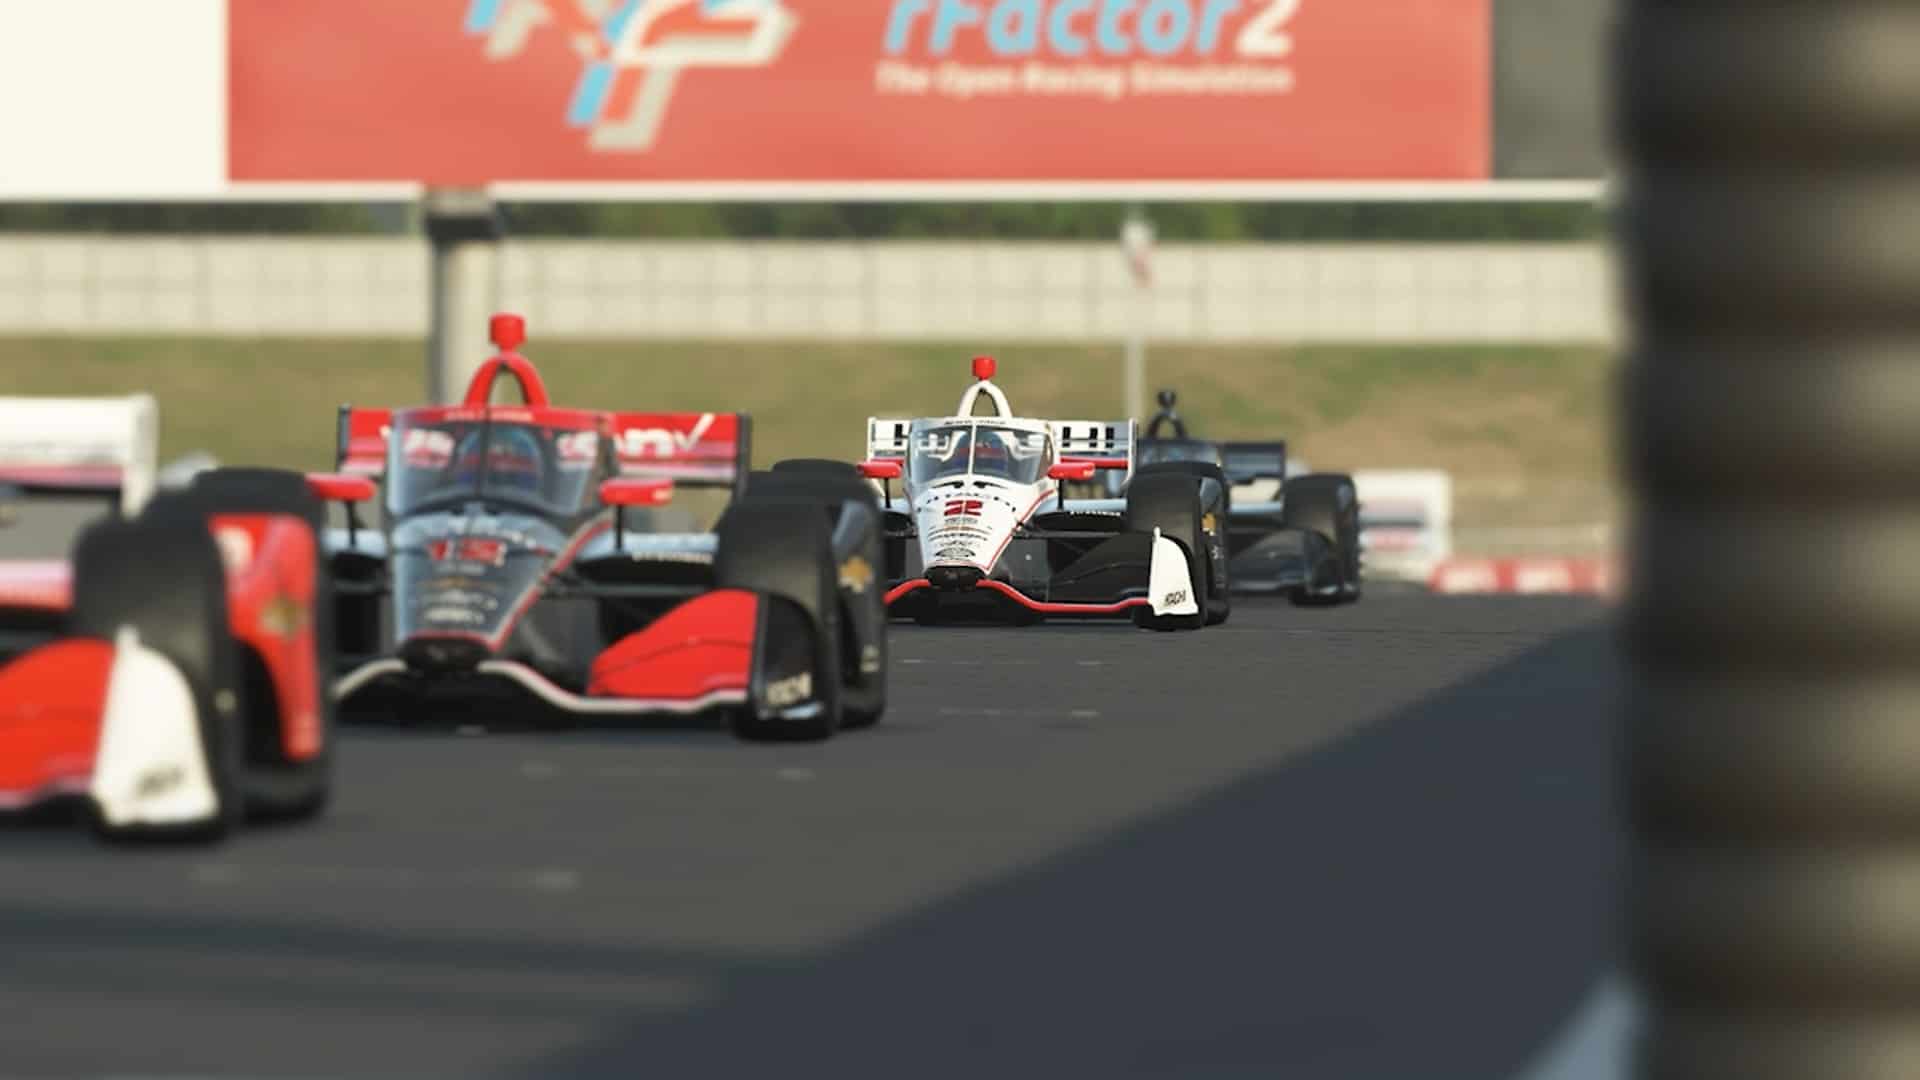 INDYCAR's Dallara IR-18 coming to rFactor 2, showcased in Pro Challenge